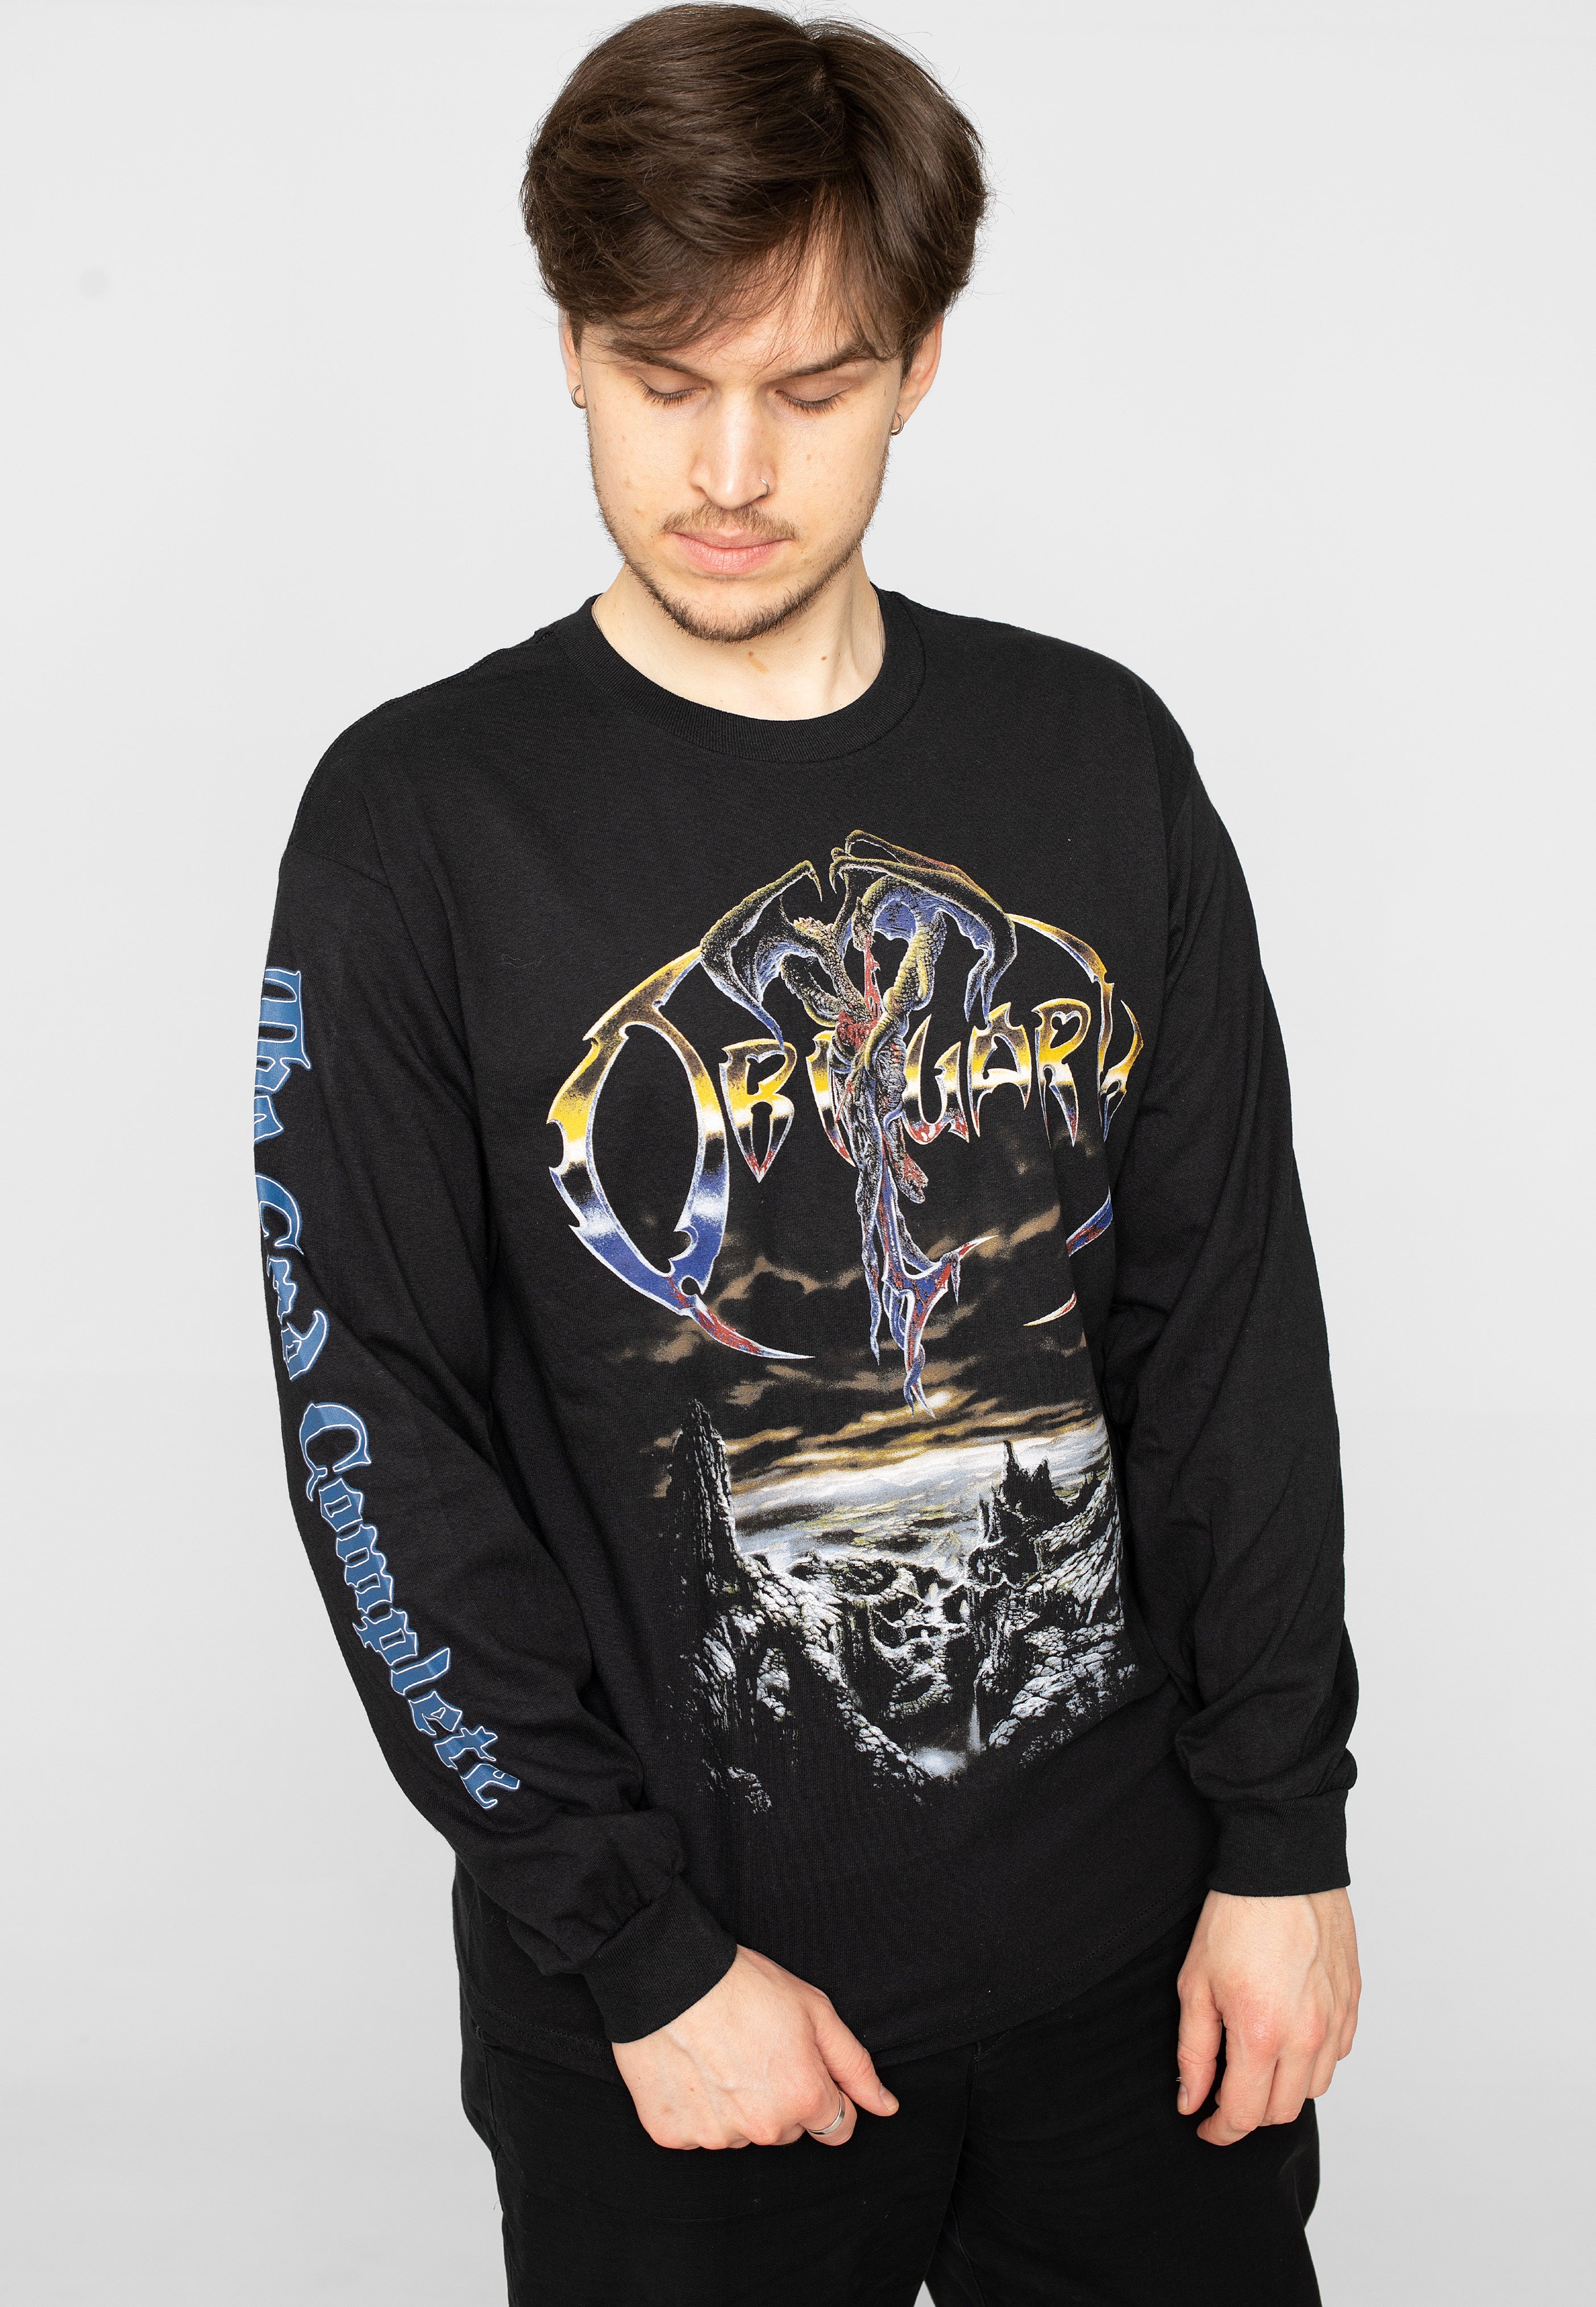 Obituary - The End Complete - Longsleeve